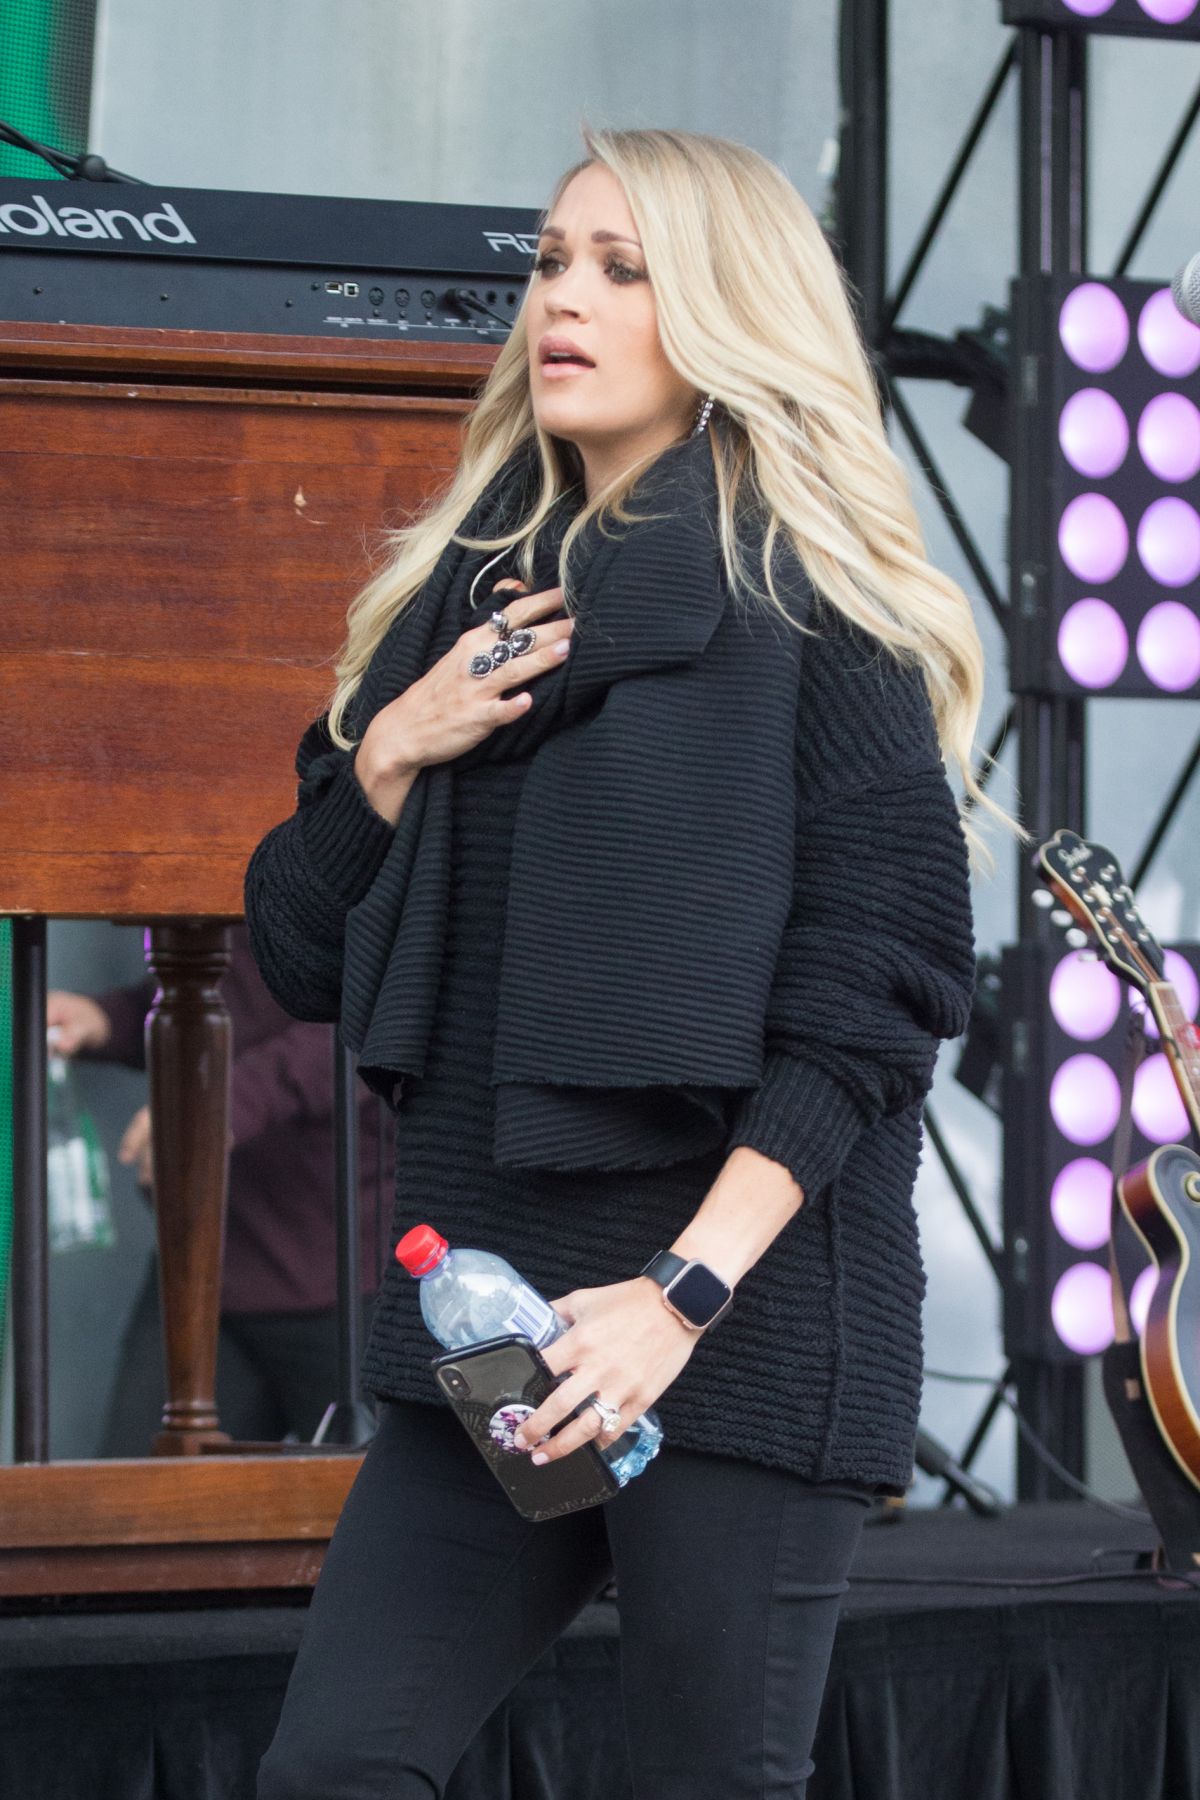 pregnant-carrie-underwood-performs-at-federation-square-in-melbourne-09-27-2018-7.jpg